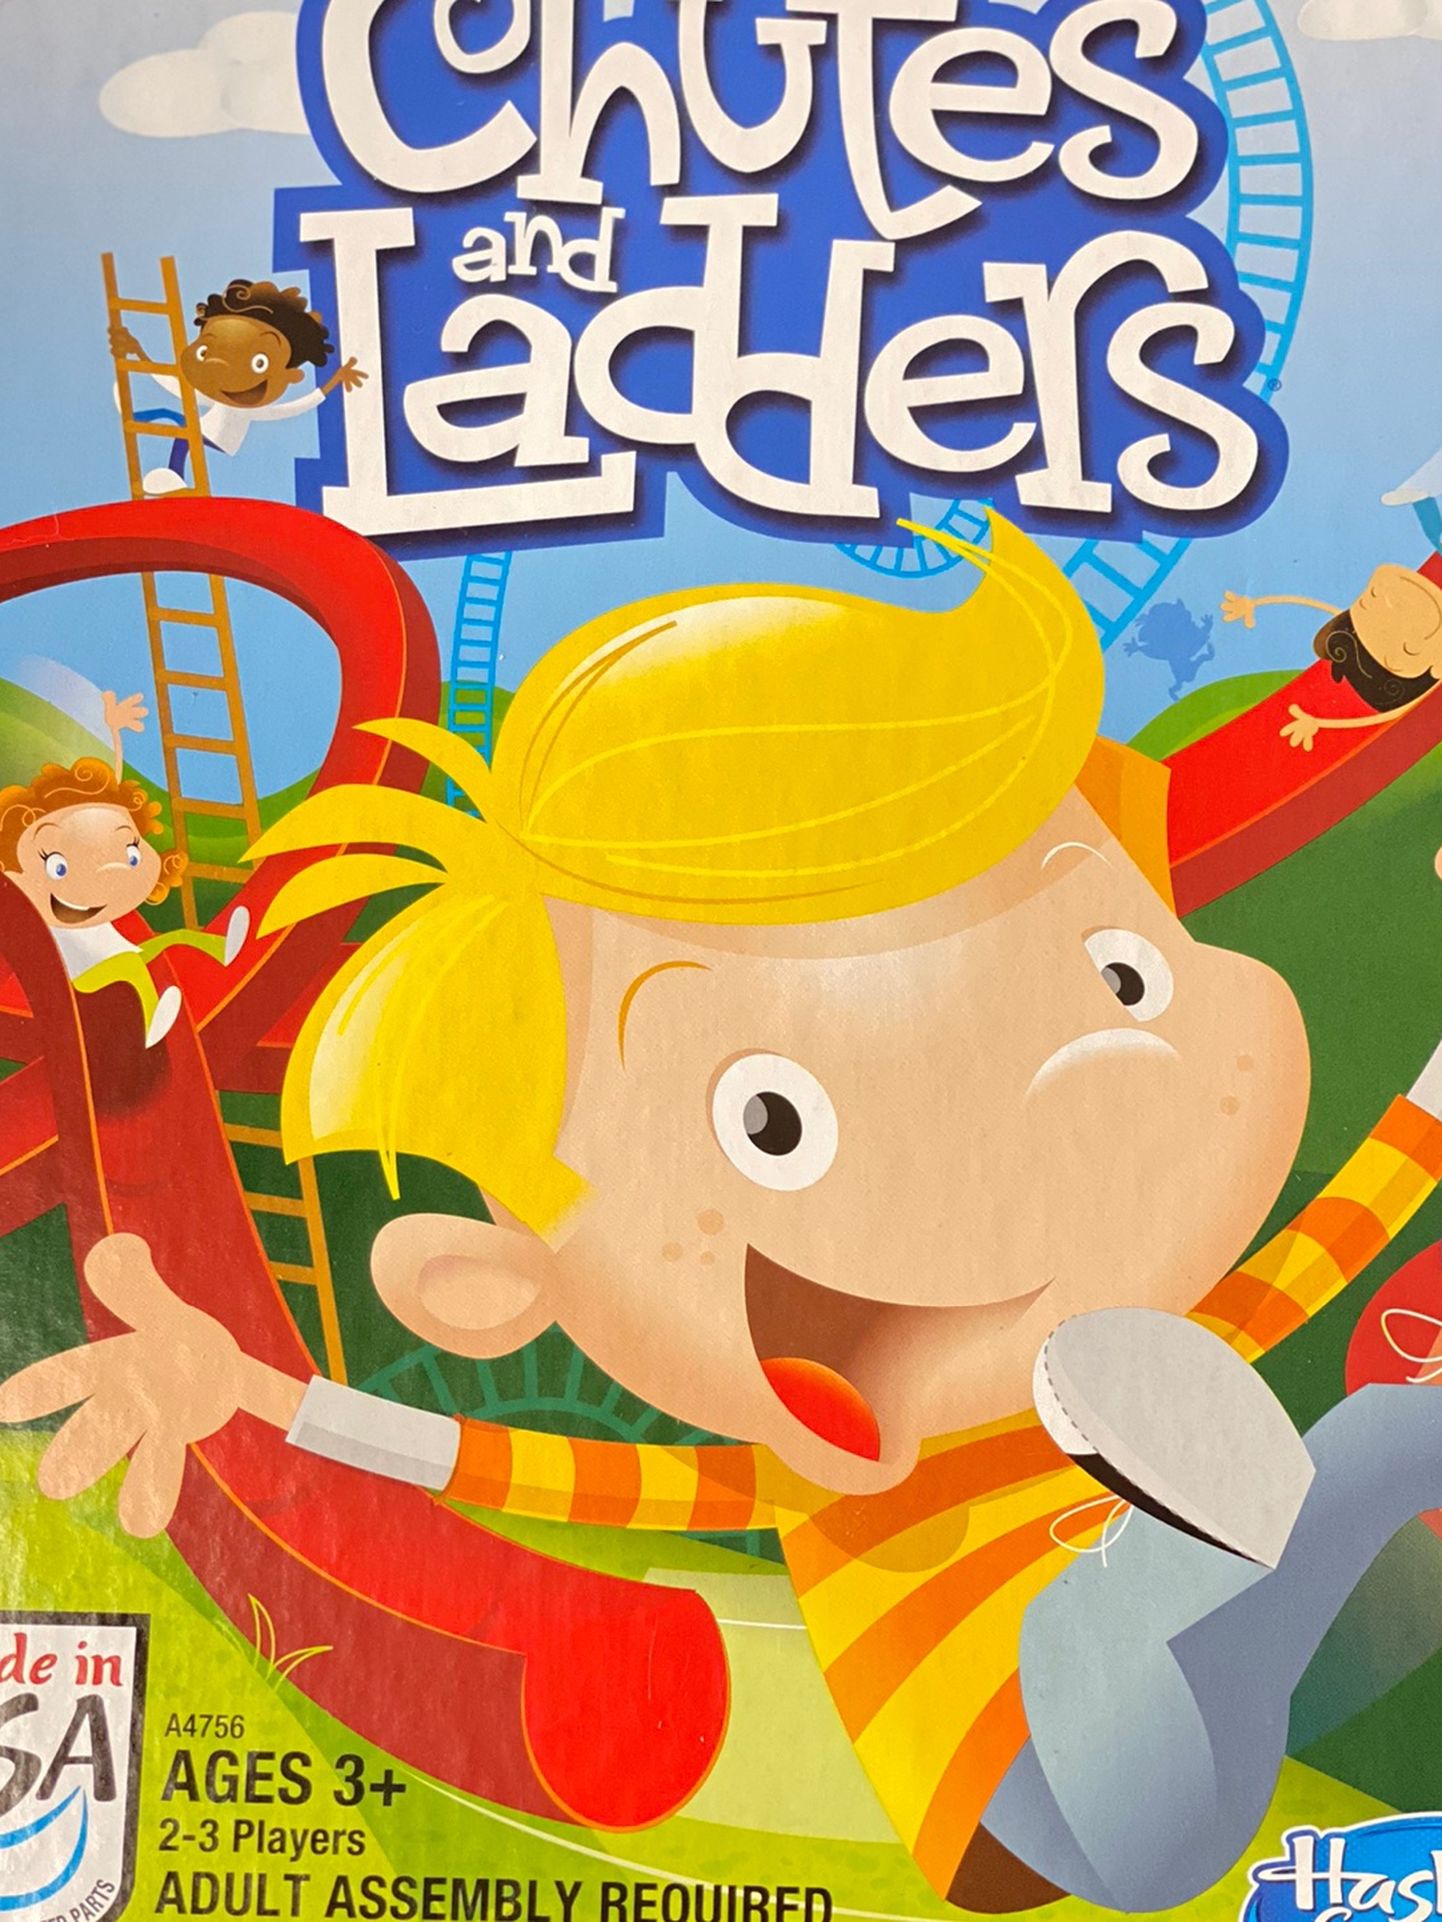 Chutes and Ladders Classic Family Board Game, Game for Kids Ages 3 and up